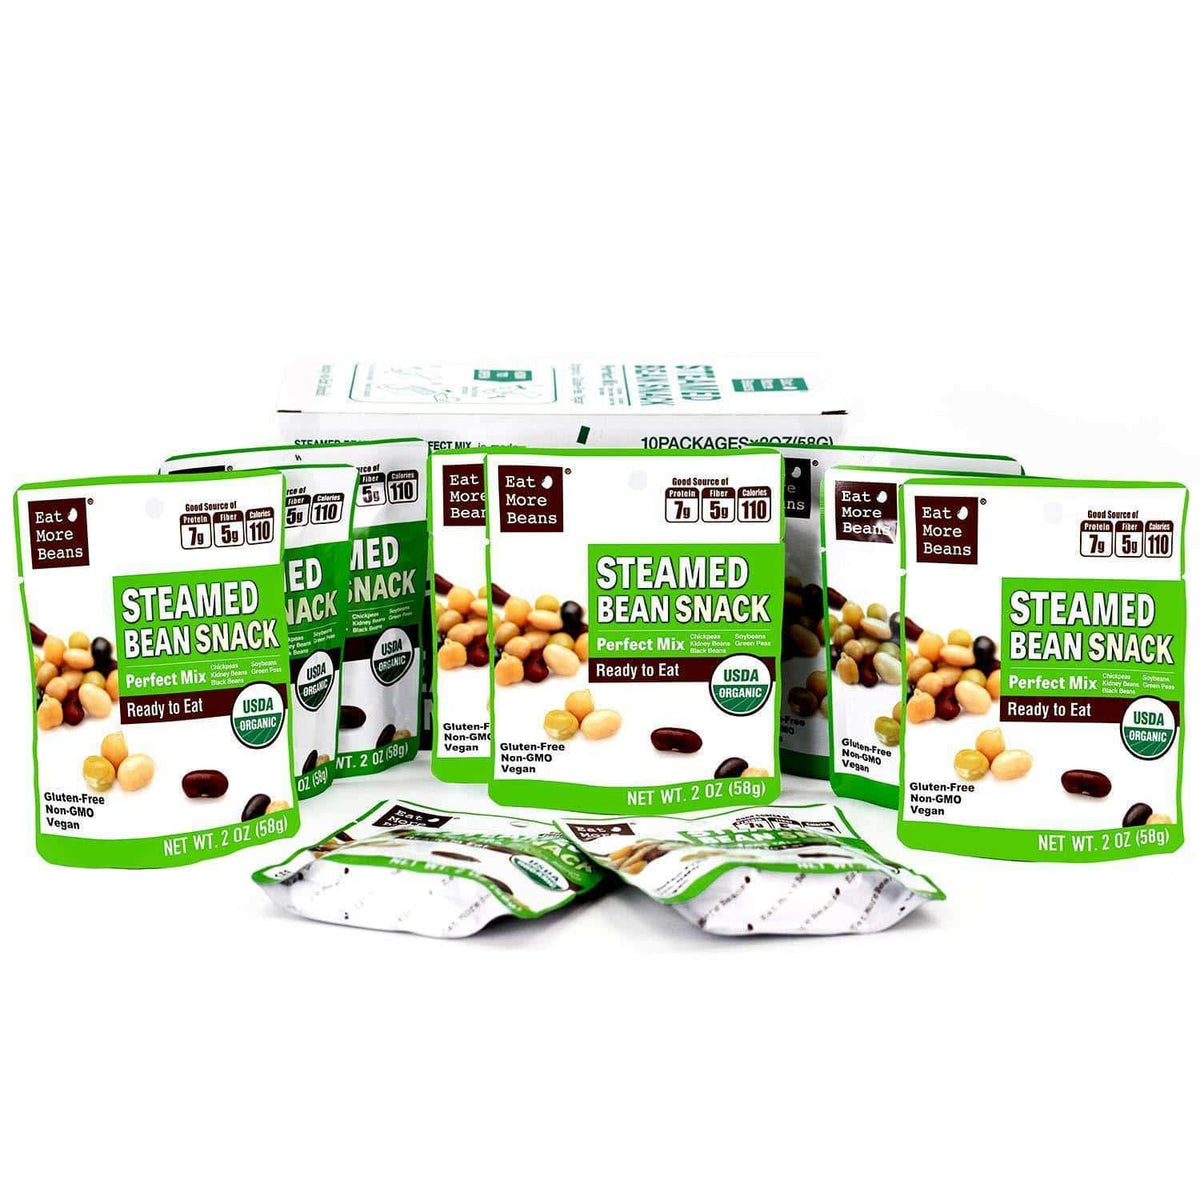 [Eat More Beans] Perfect Mix STEAMED BEAN SNACK | 2oz | 1 Bag